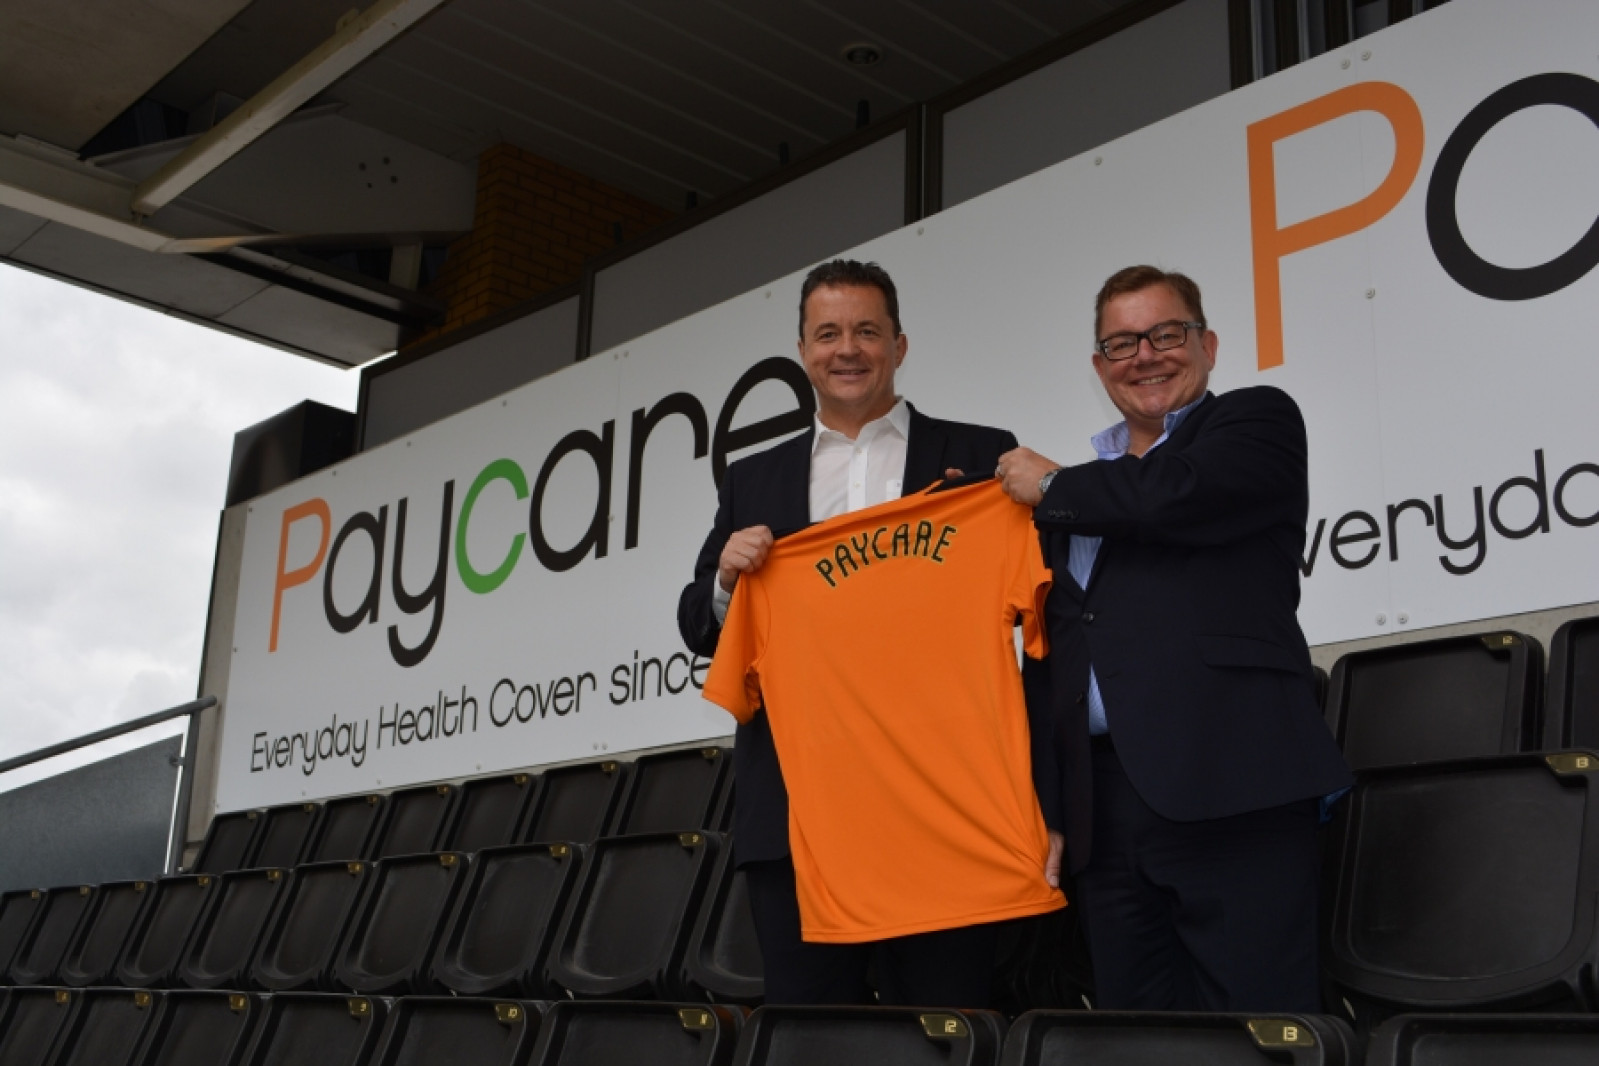 HEALTH COVER COMPANY TEAMS UP WITH WOLVES